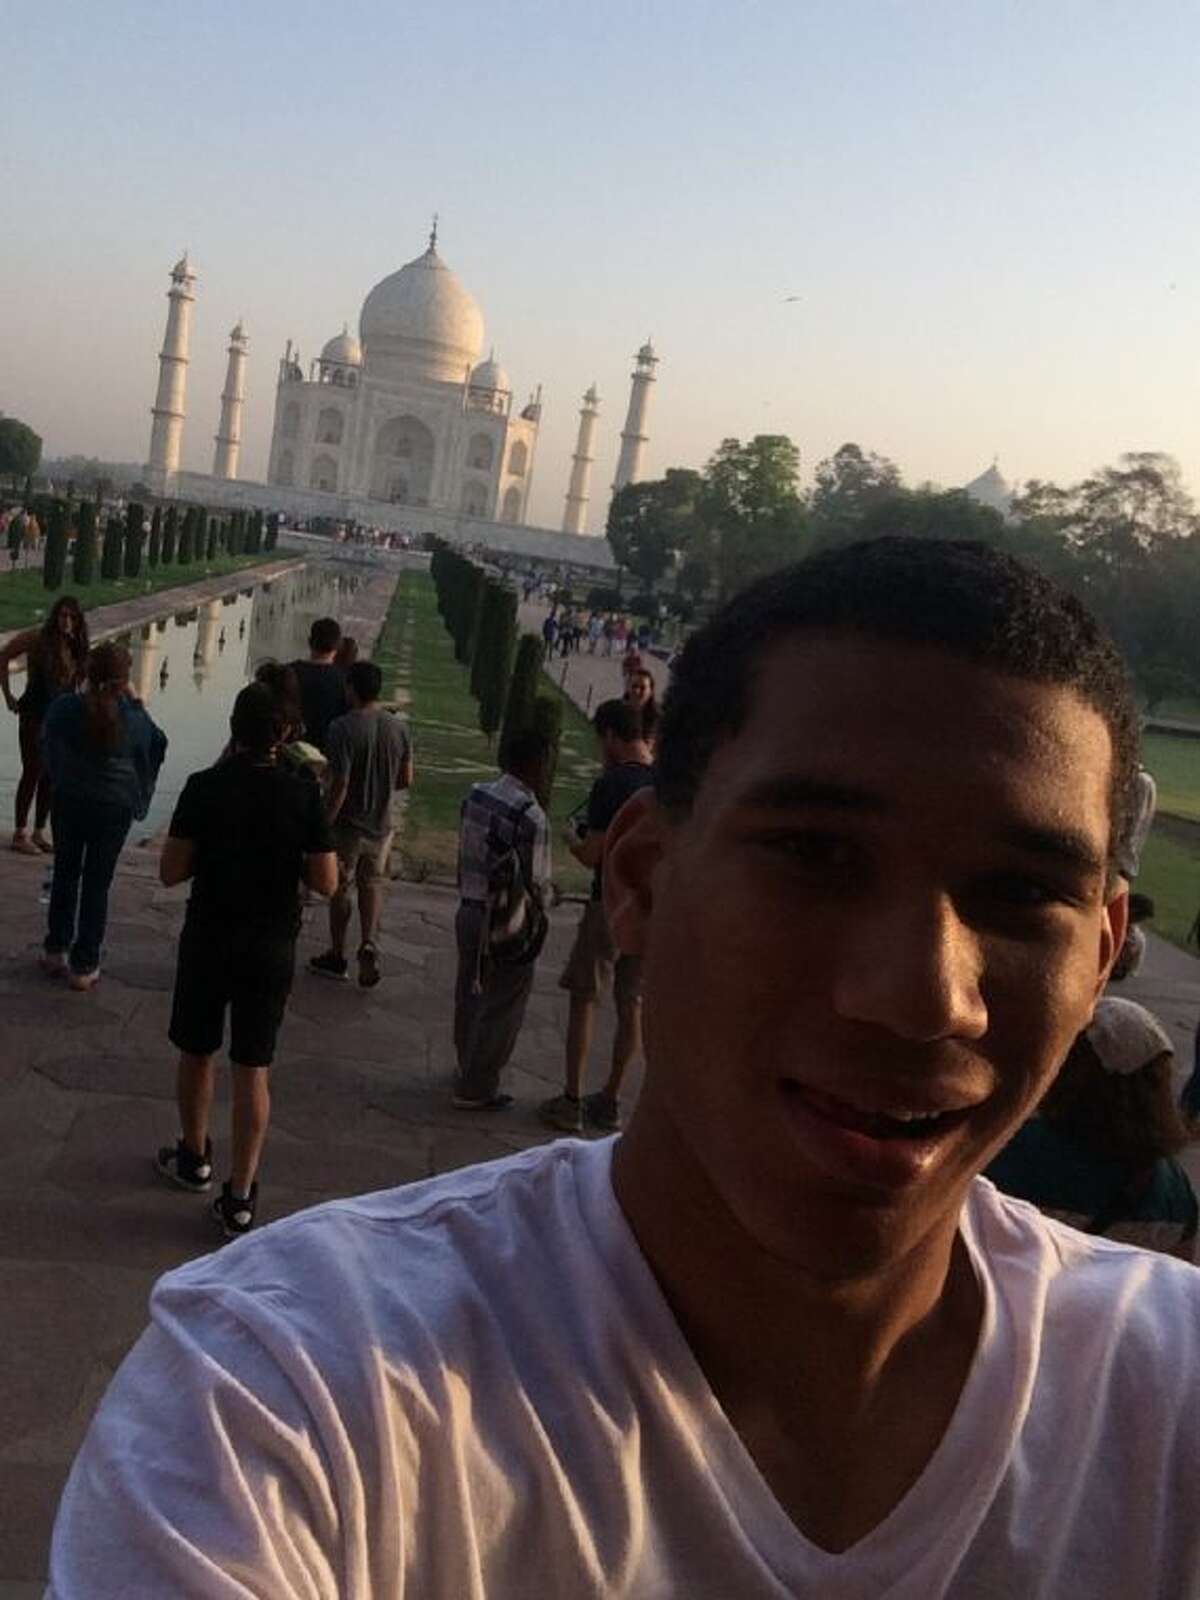 Johnathan Lohner stops in front of the Taj Mahal in Agra, India.